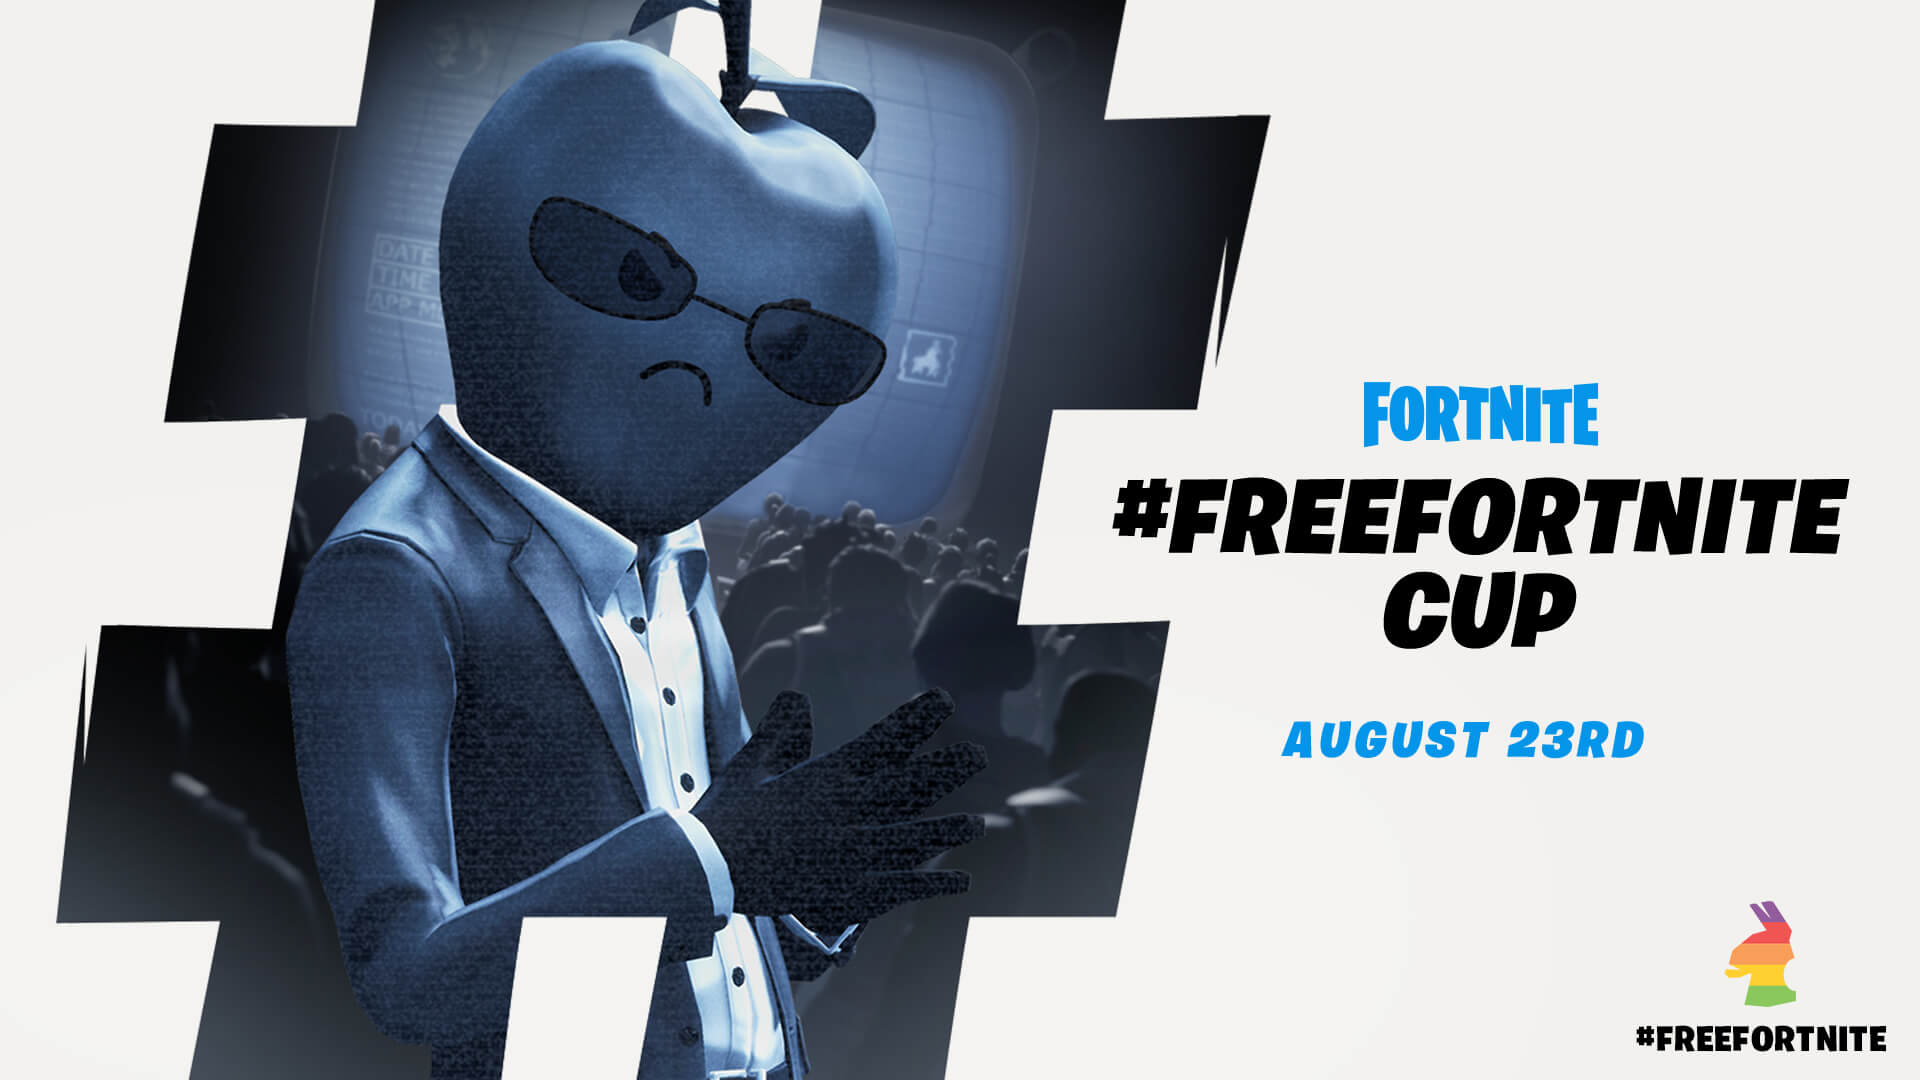 Epic Games Announces Freefortnite Tournament With Non Apple Devices As Prizes 9to5mac